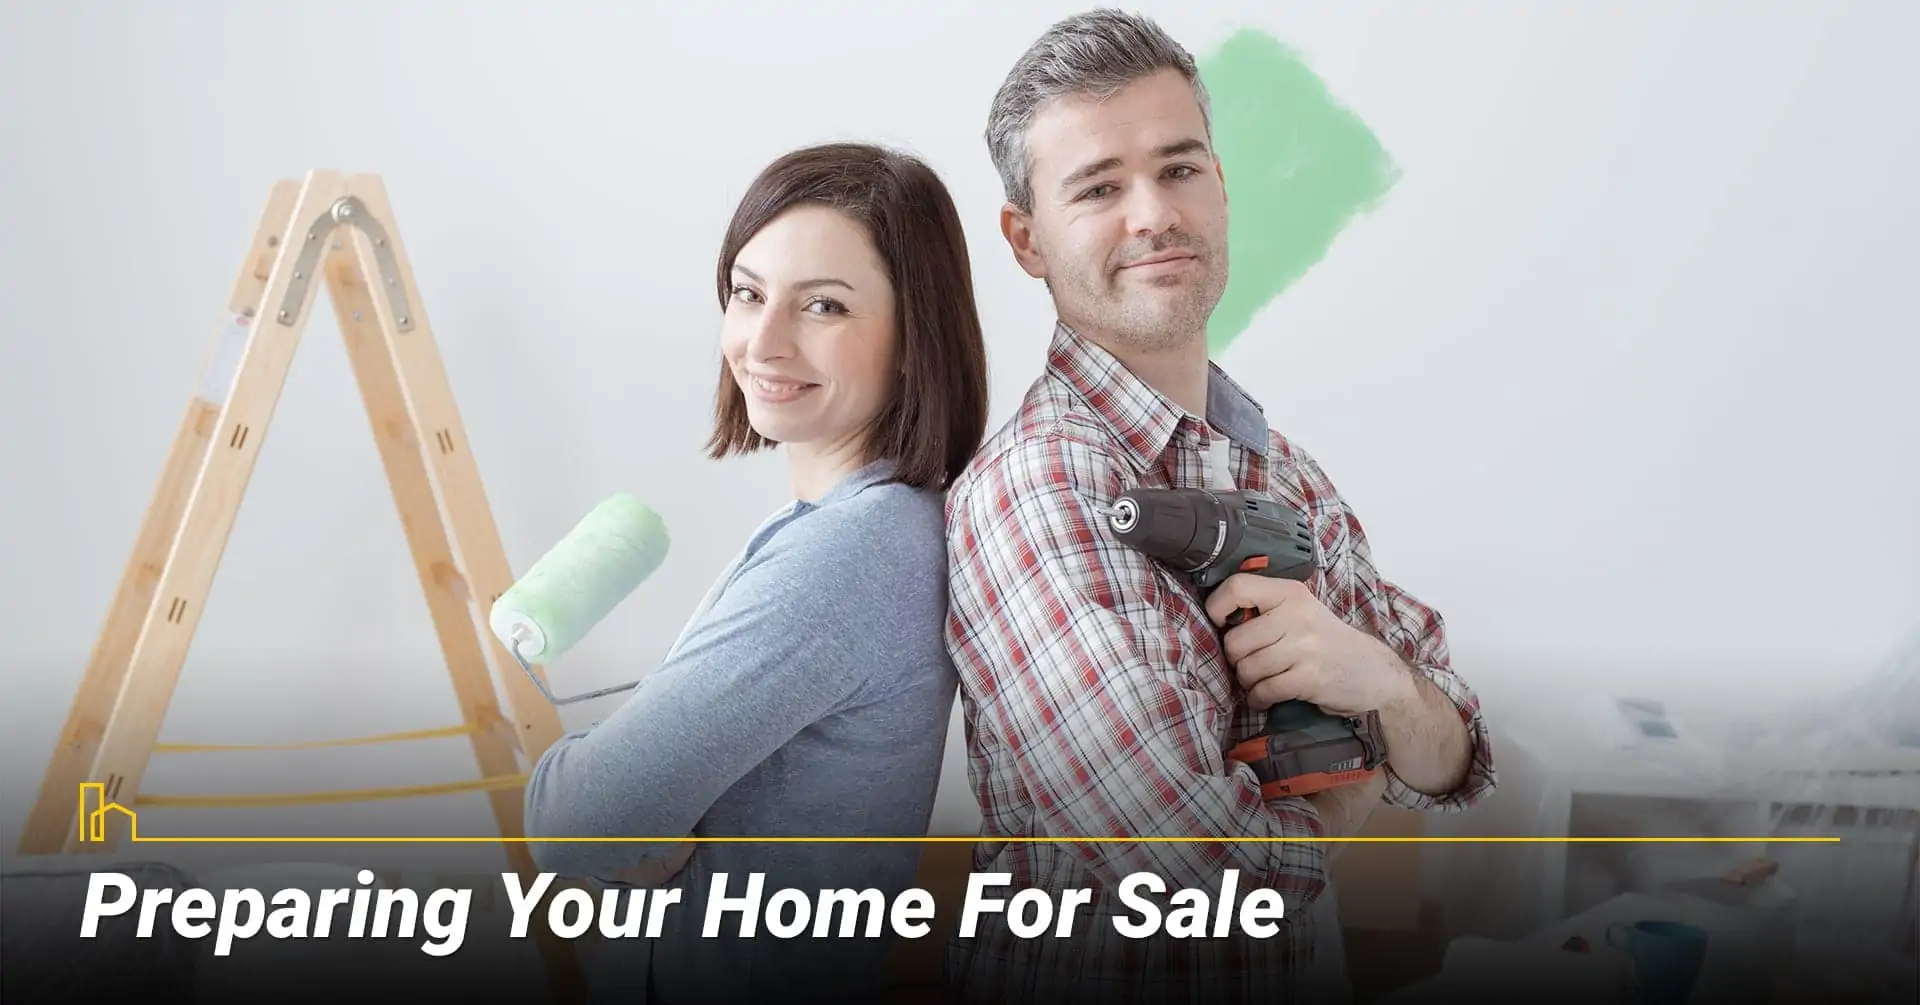 Preparing Your Home For Sale. Make appropriate repair before selling your home